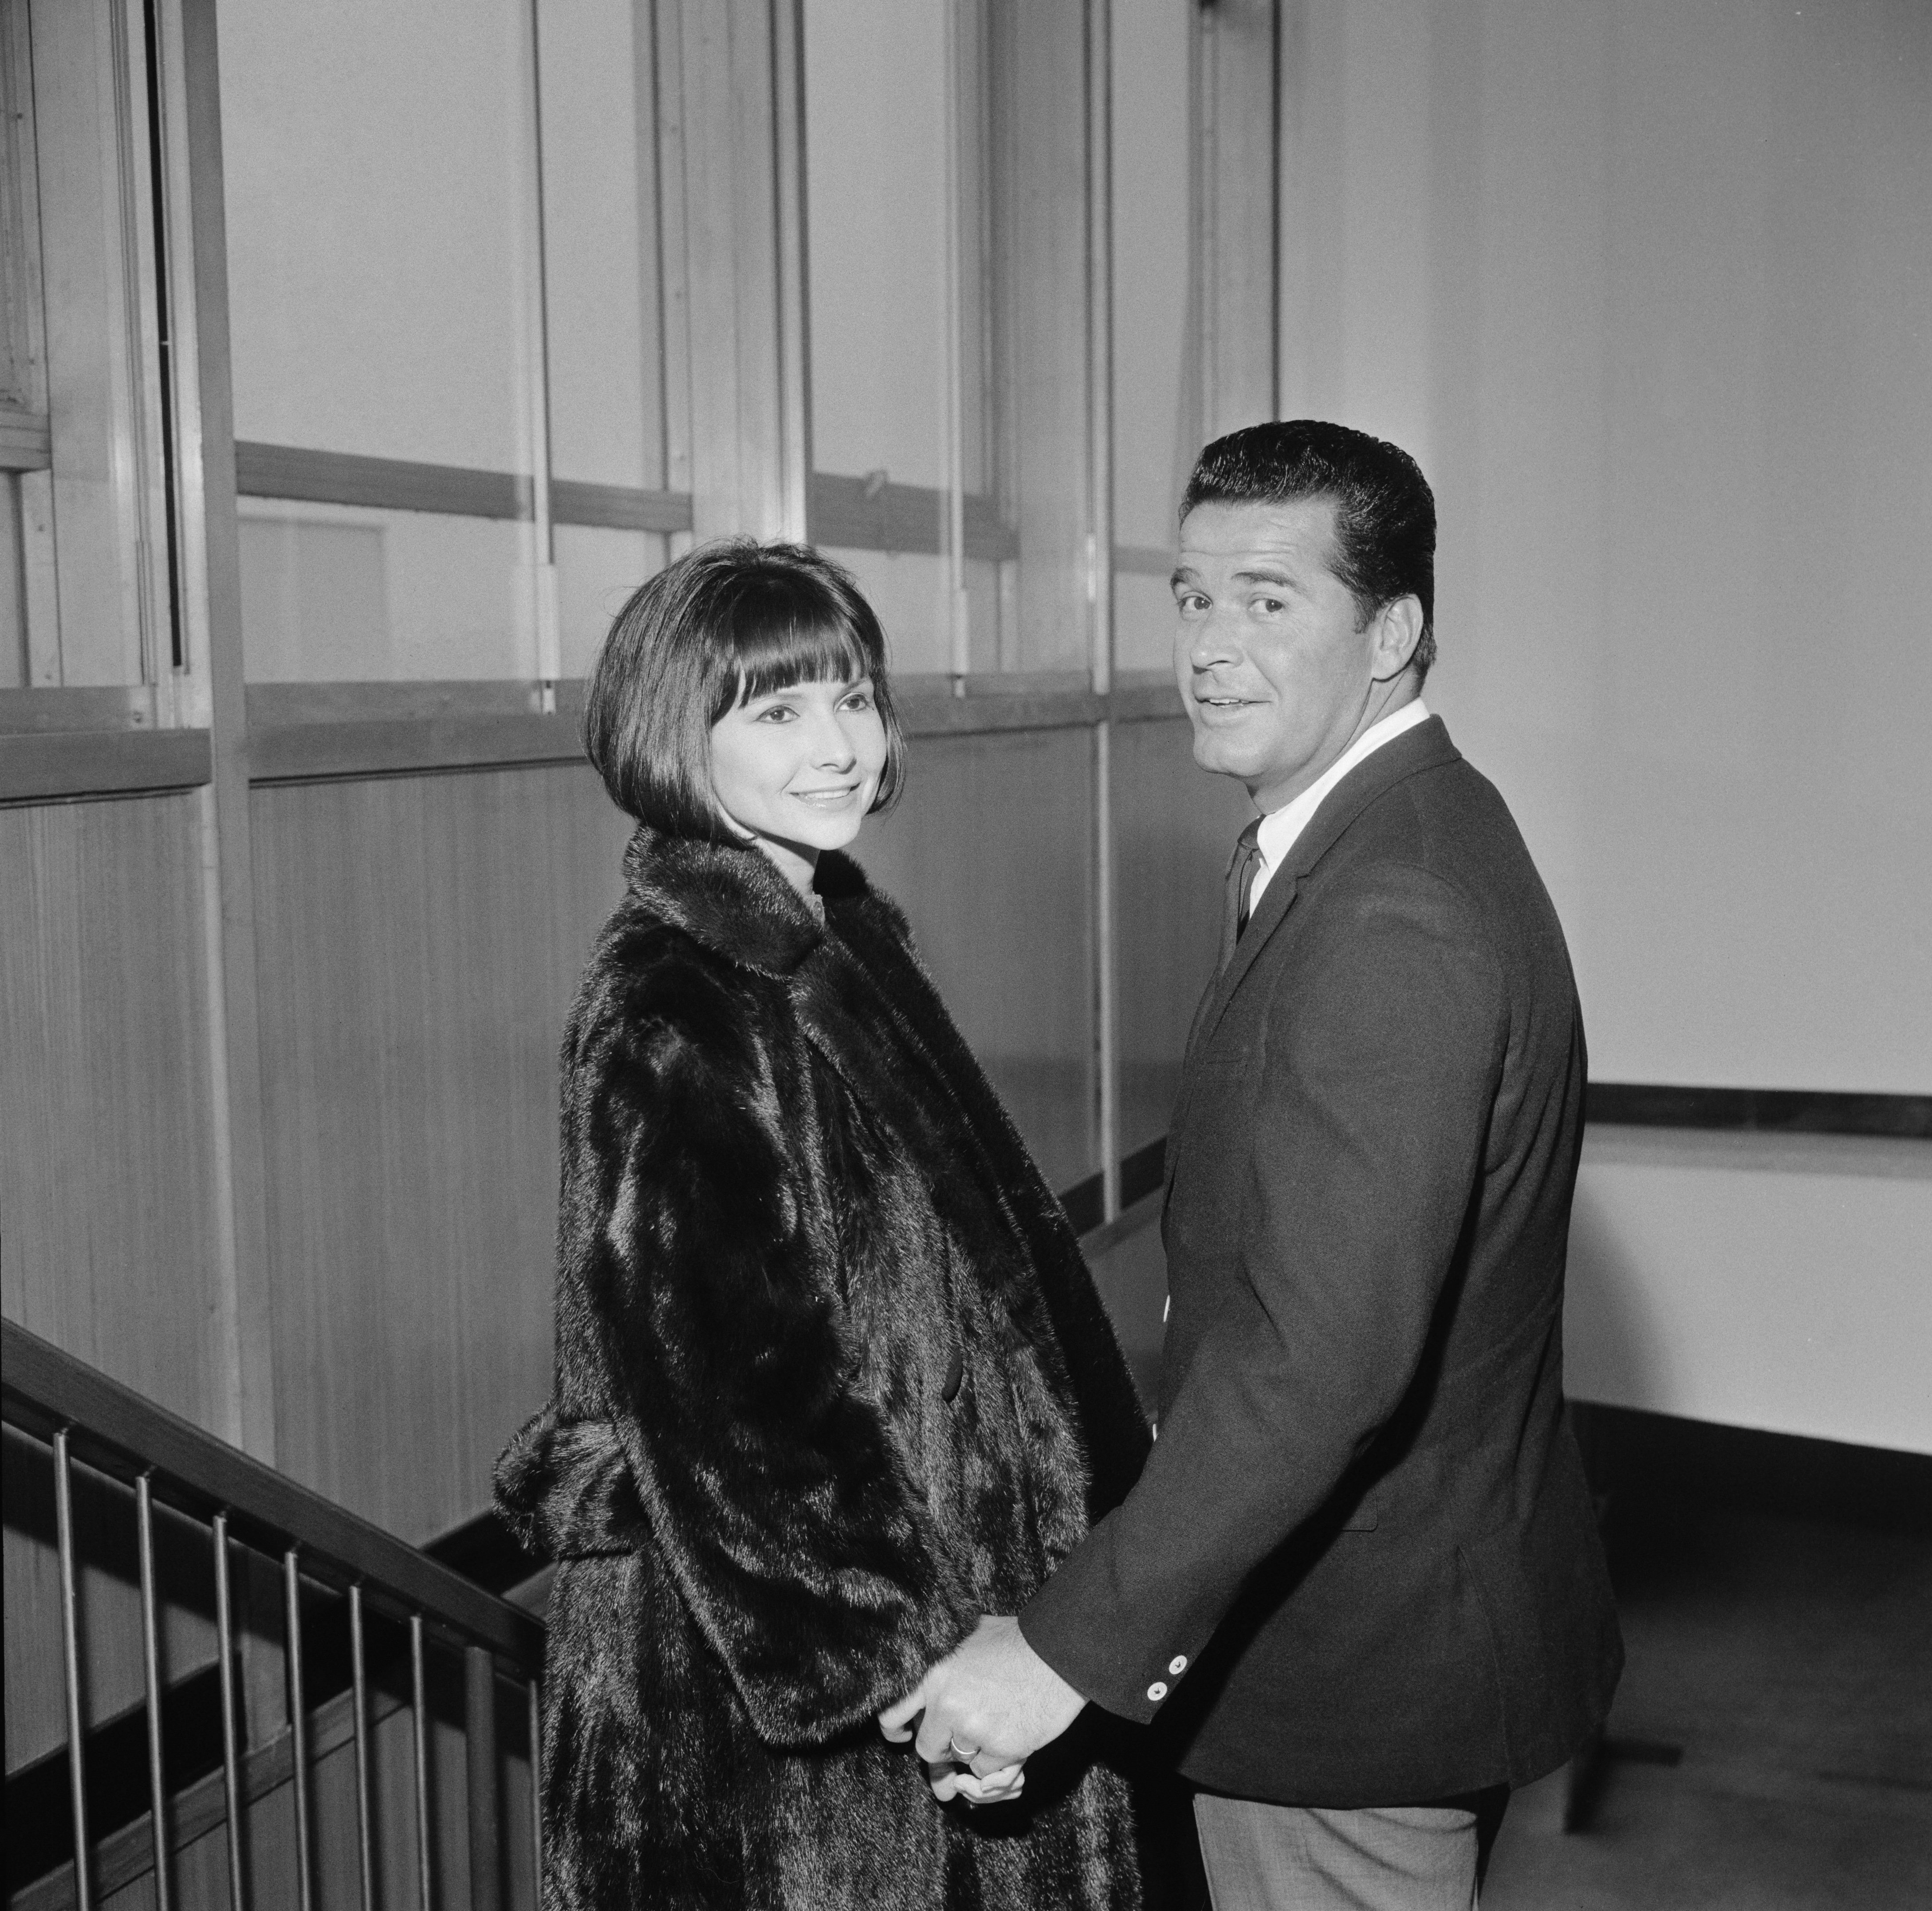 James Garner and Lois Clarke photographed holding hands on a staircase on March 1, 1964 in the United Kingdom | Source: Getty Images